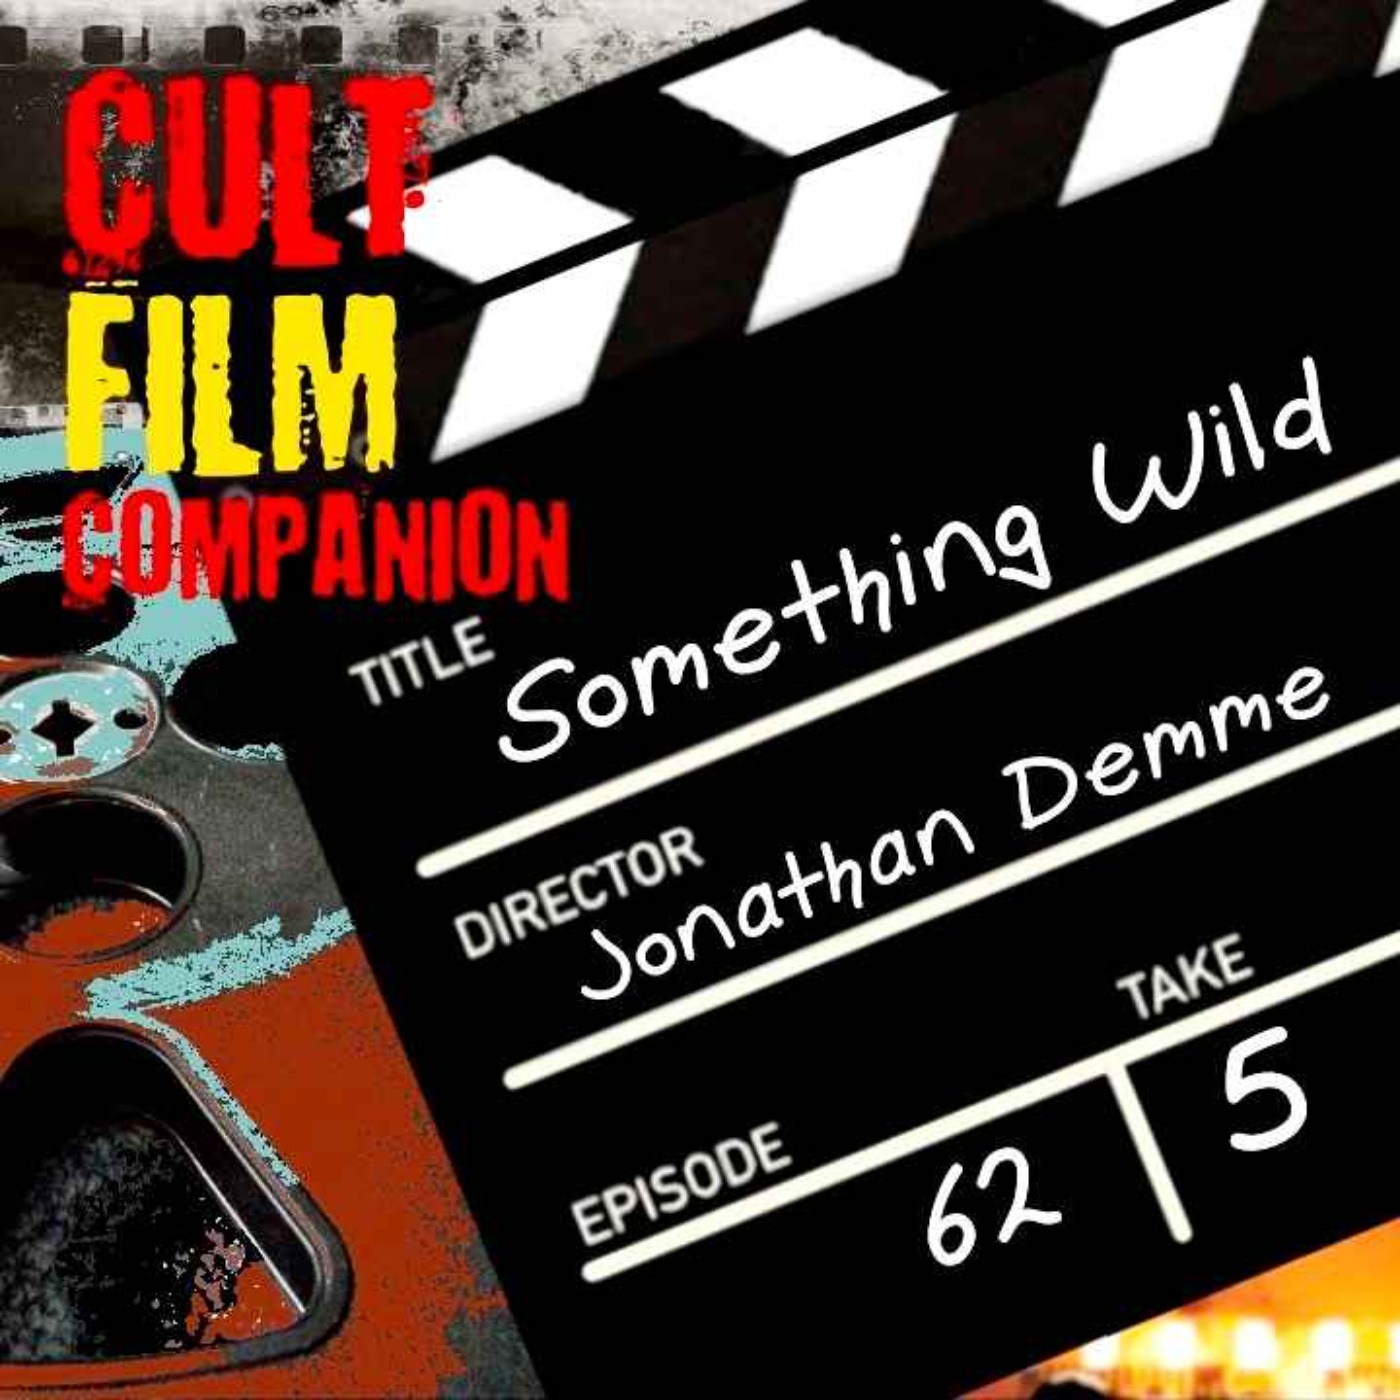 Ep. 62 Something Wild directed by Jonathan Demme